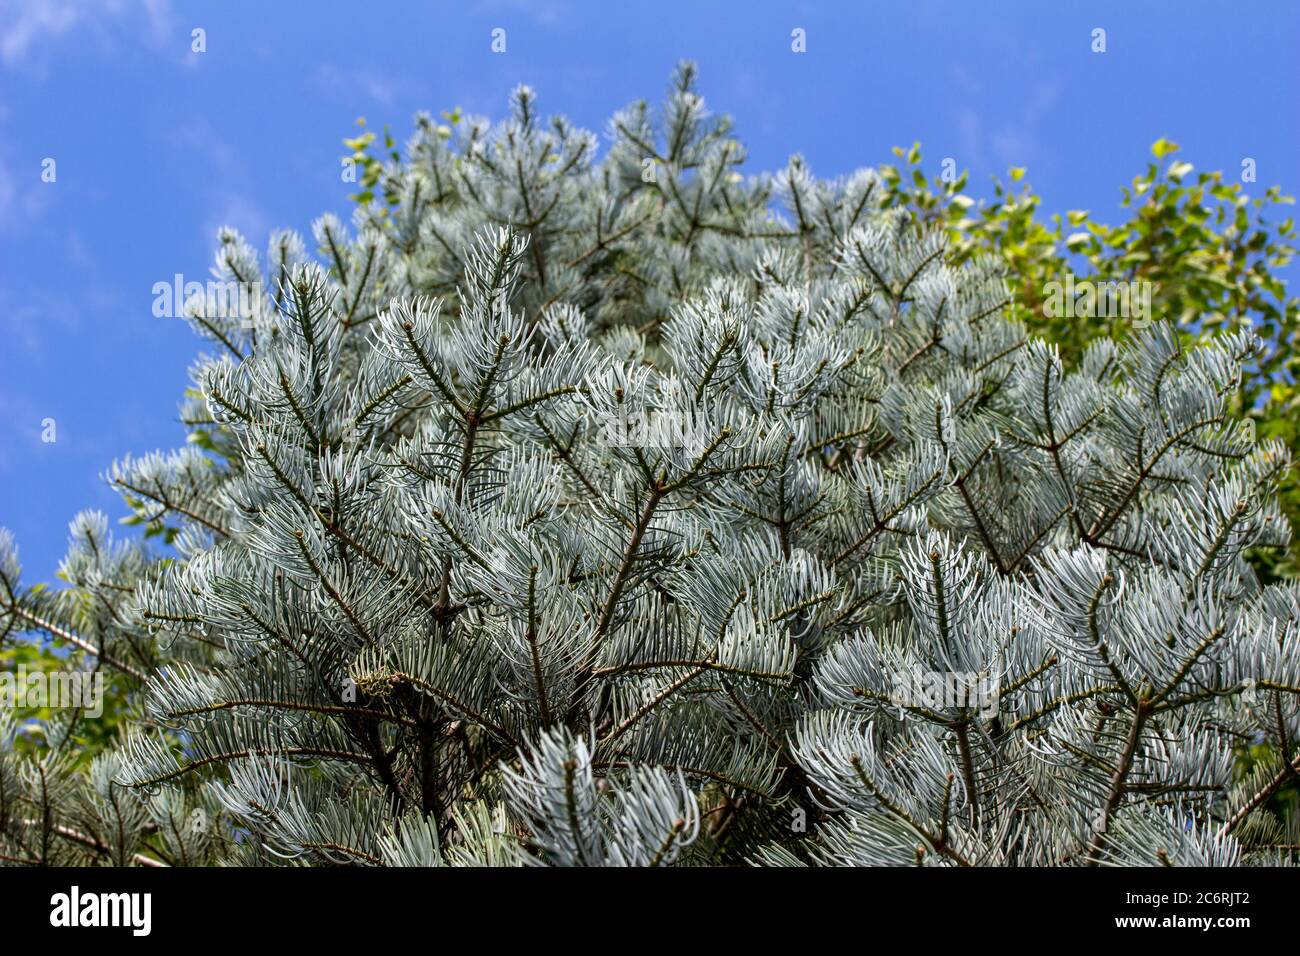 Close up abstract view of upright growing needles on a white fir tree in warm weather Stock Photo